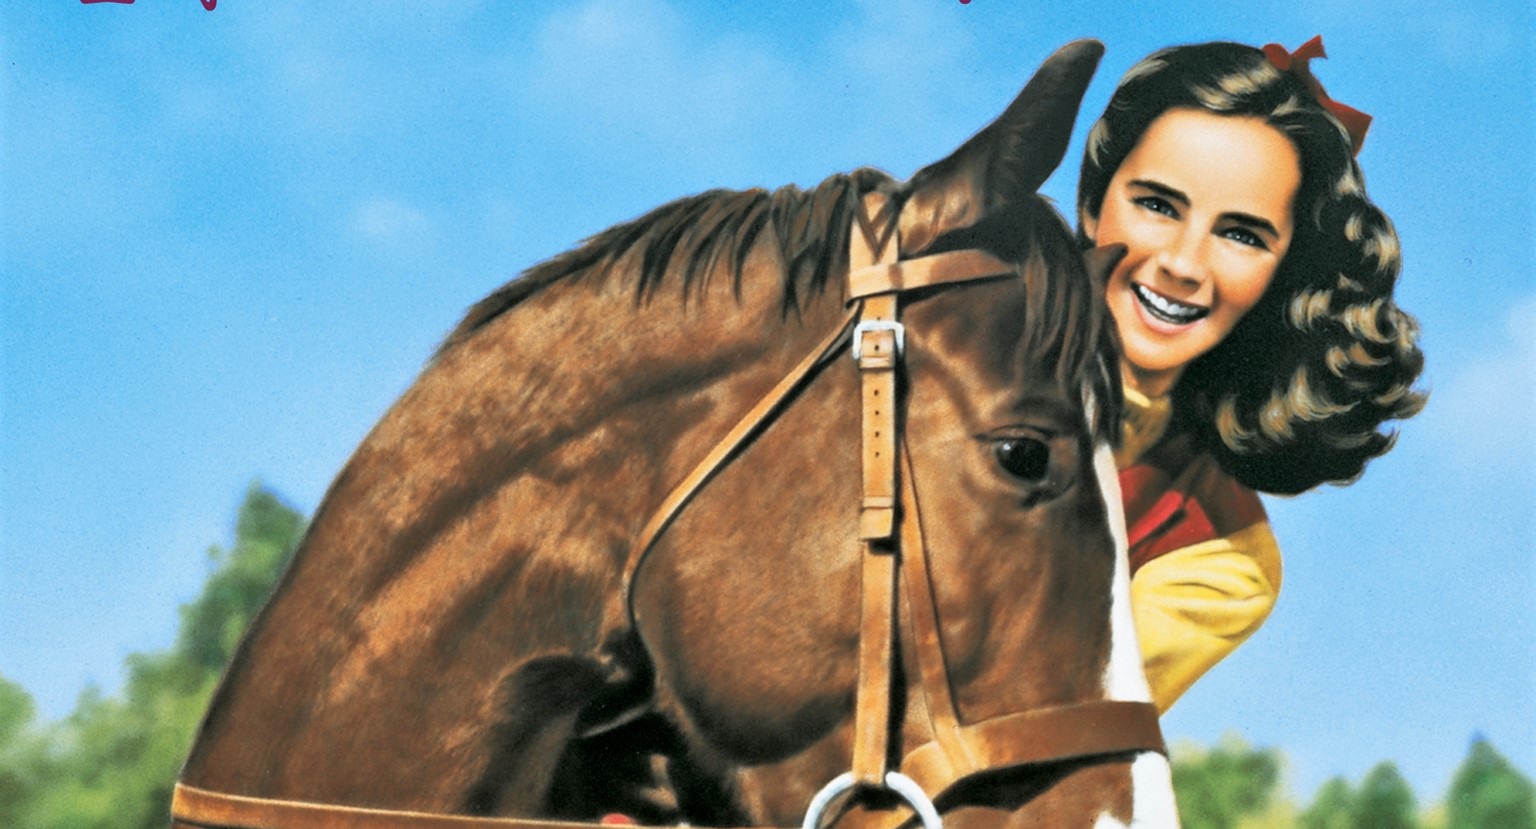 8 Facts You Didn’t Know About the National Velvet Movie